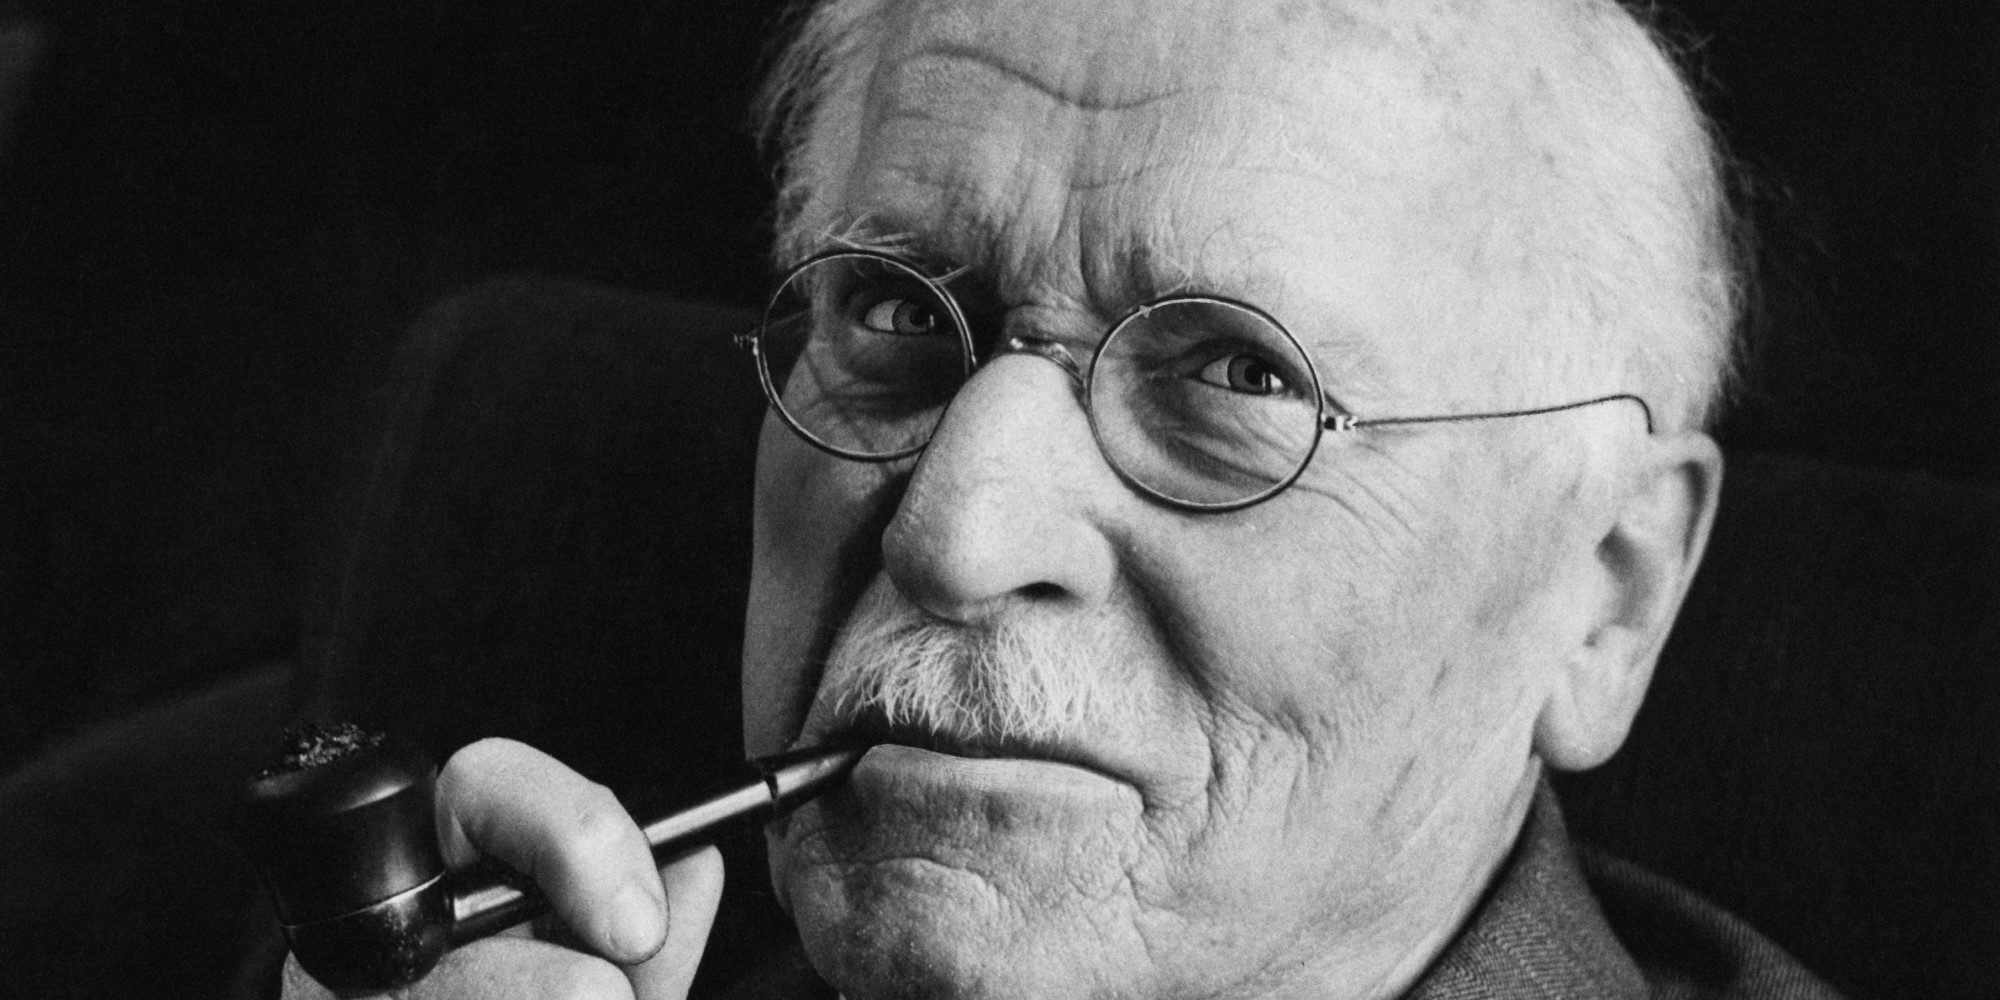 Swiss psychiatrist Carl Gustav Jung, the founder of analytical psychology, 1960. Photo by Douglas Glass/Paul Popper/Popperfoto/Getty Images. Perhaps t